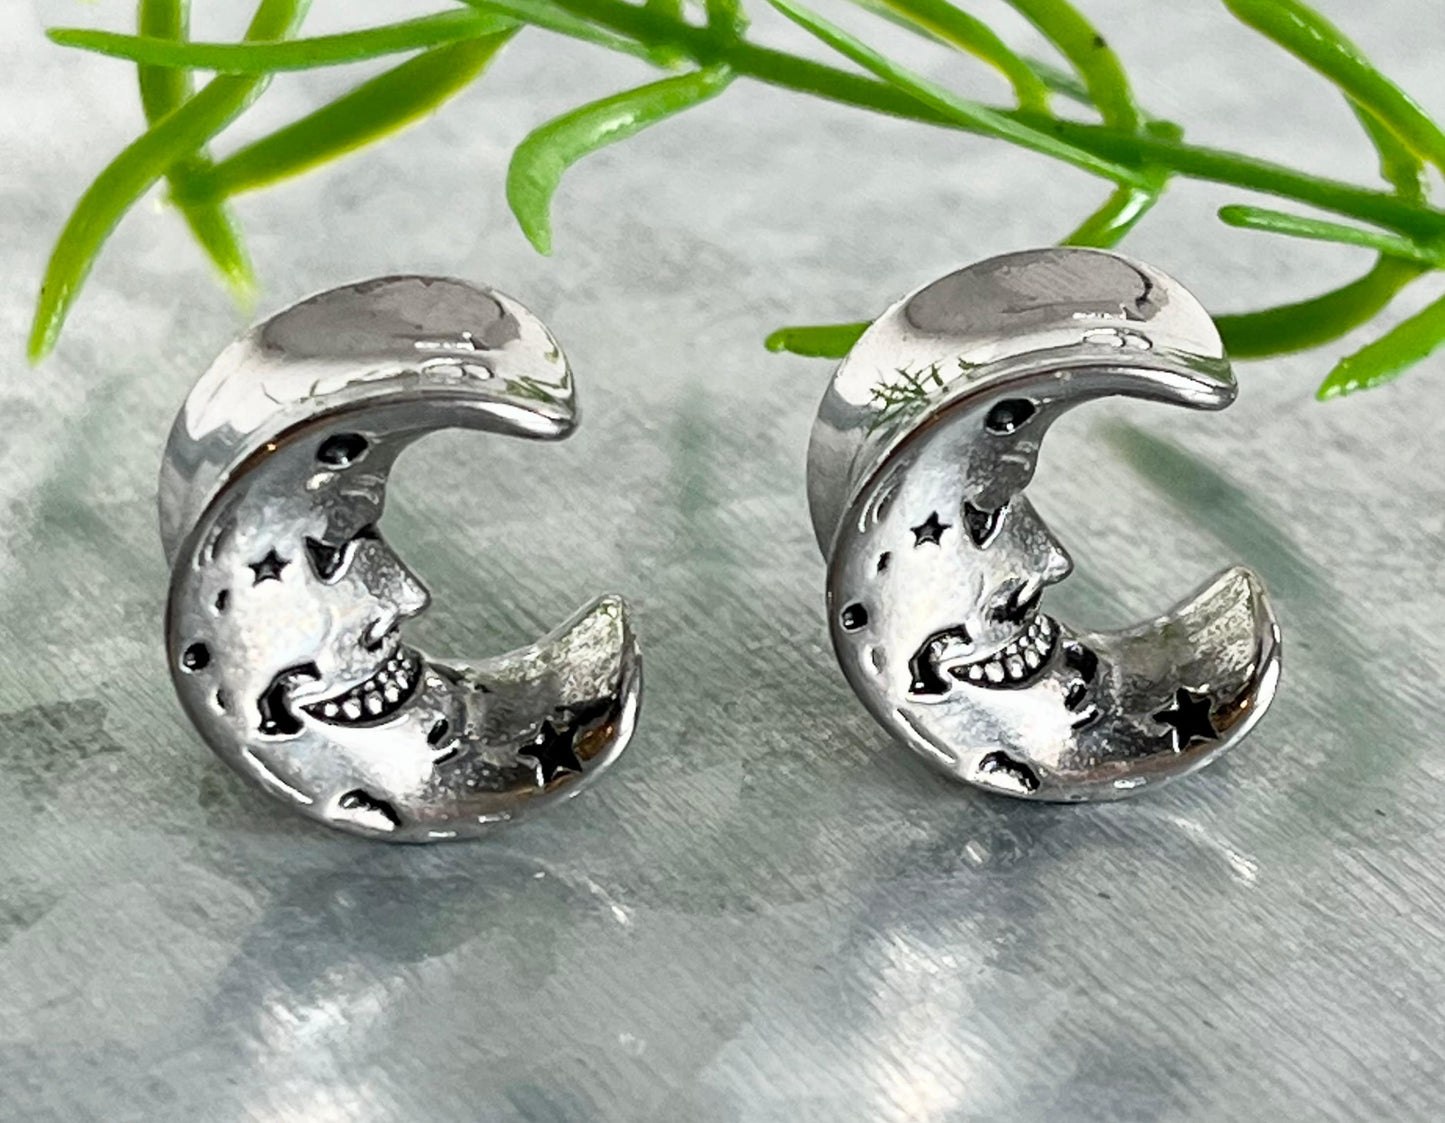 PAIR of Unique Face of the Moon Saddle Surgical Steel Ear Spreaders Hanger-Tunnels/Plugs - Gauges 0g (8mm) thru 16mm available!